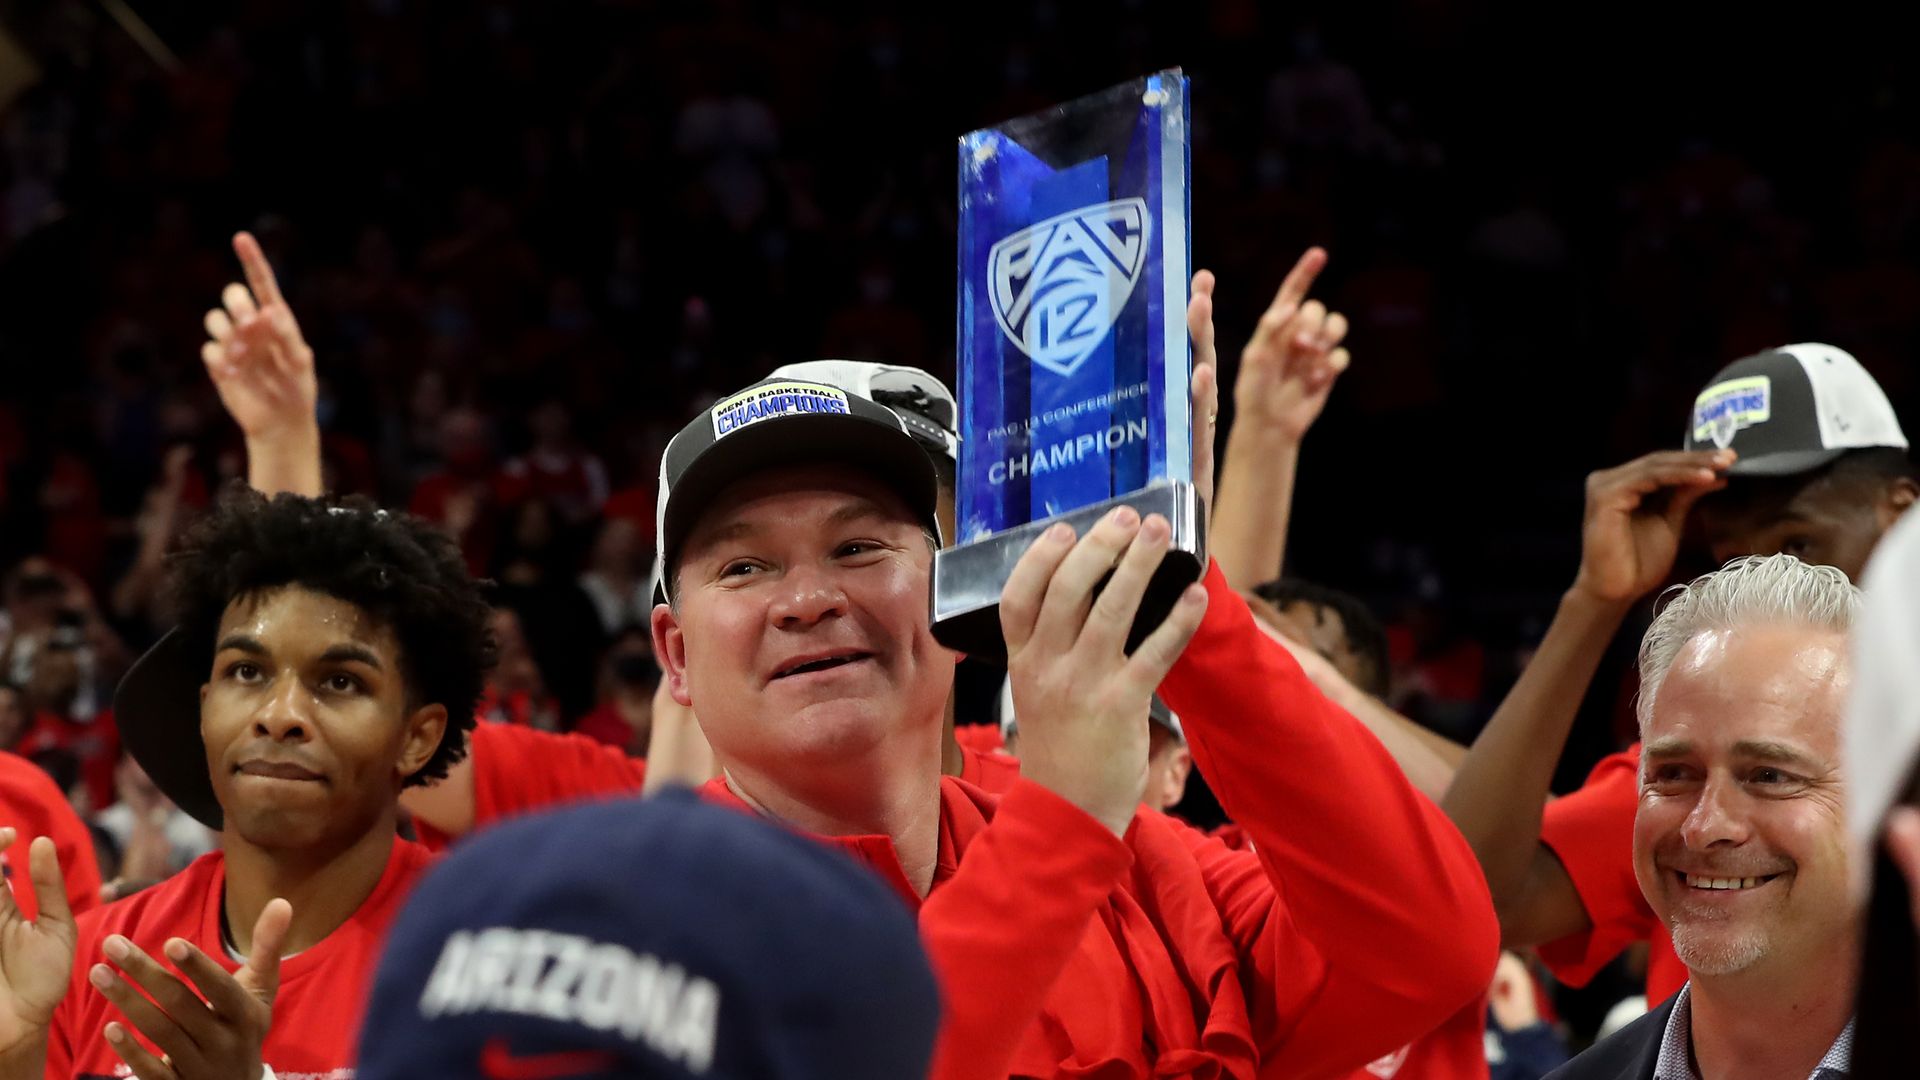 University of Arizona men's basketball coach Tommy Lloyd holds up a Pac-12 conference championship trophy